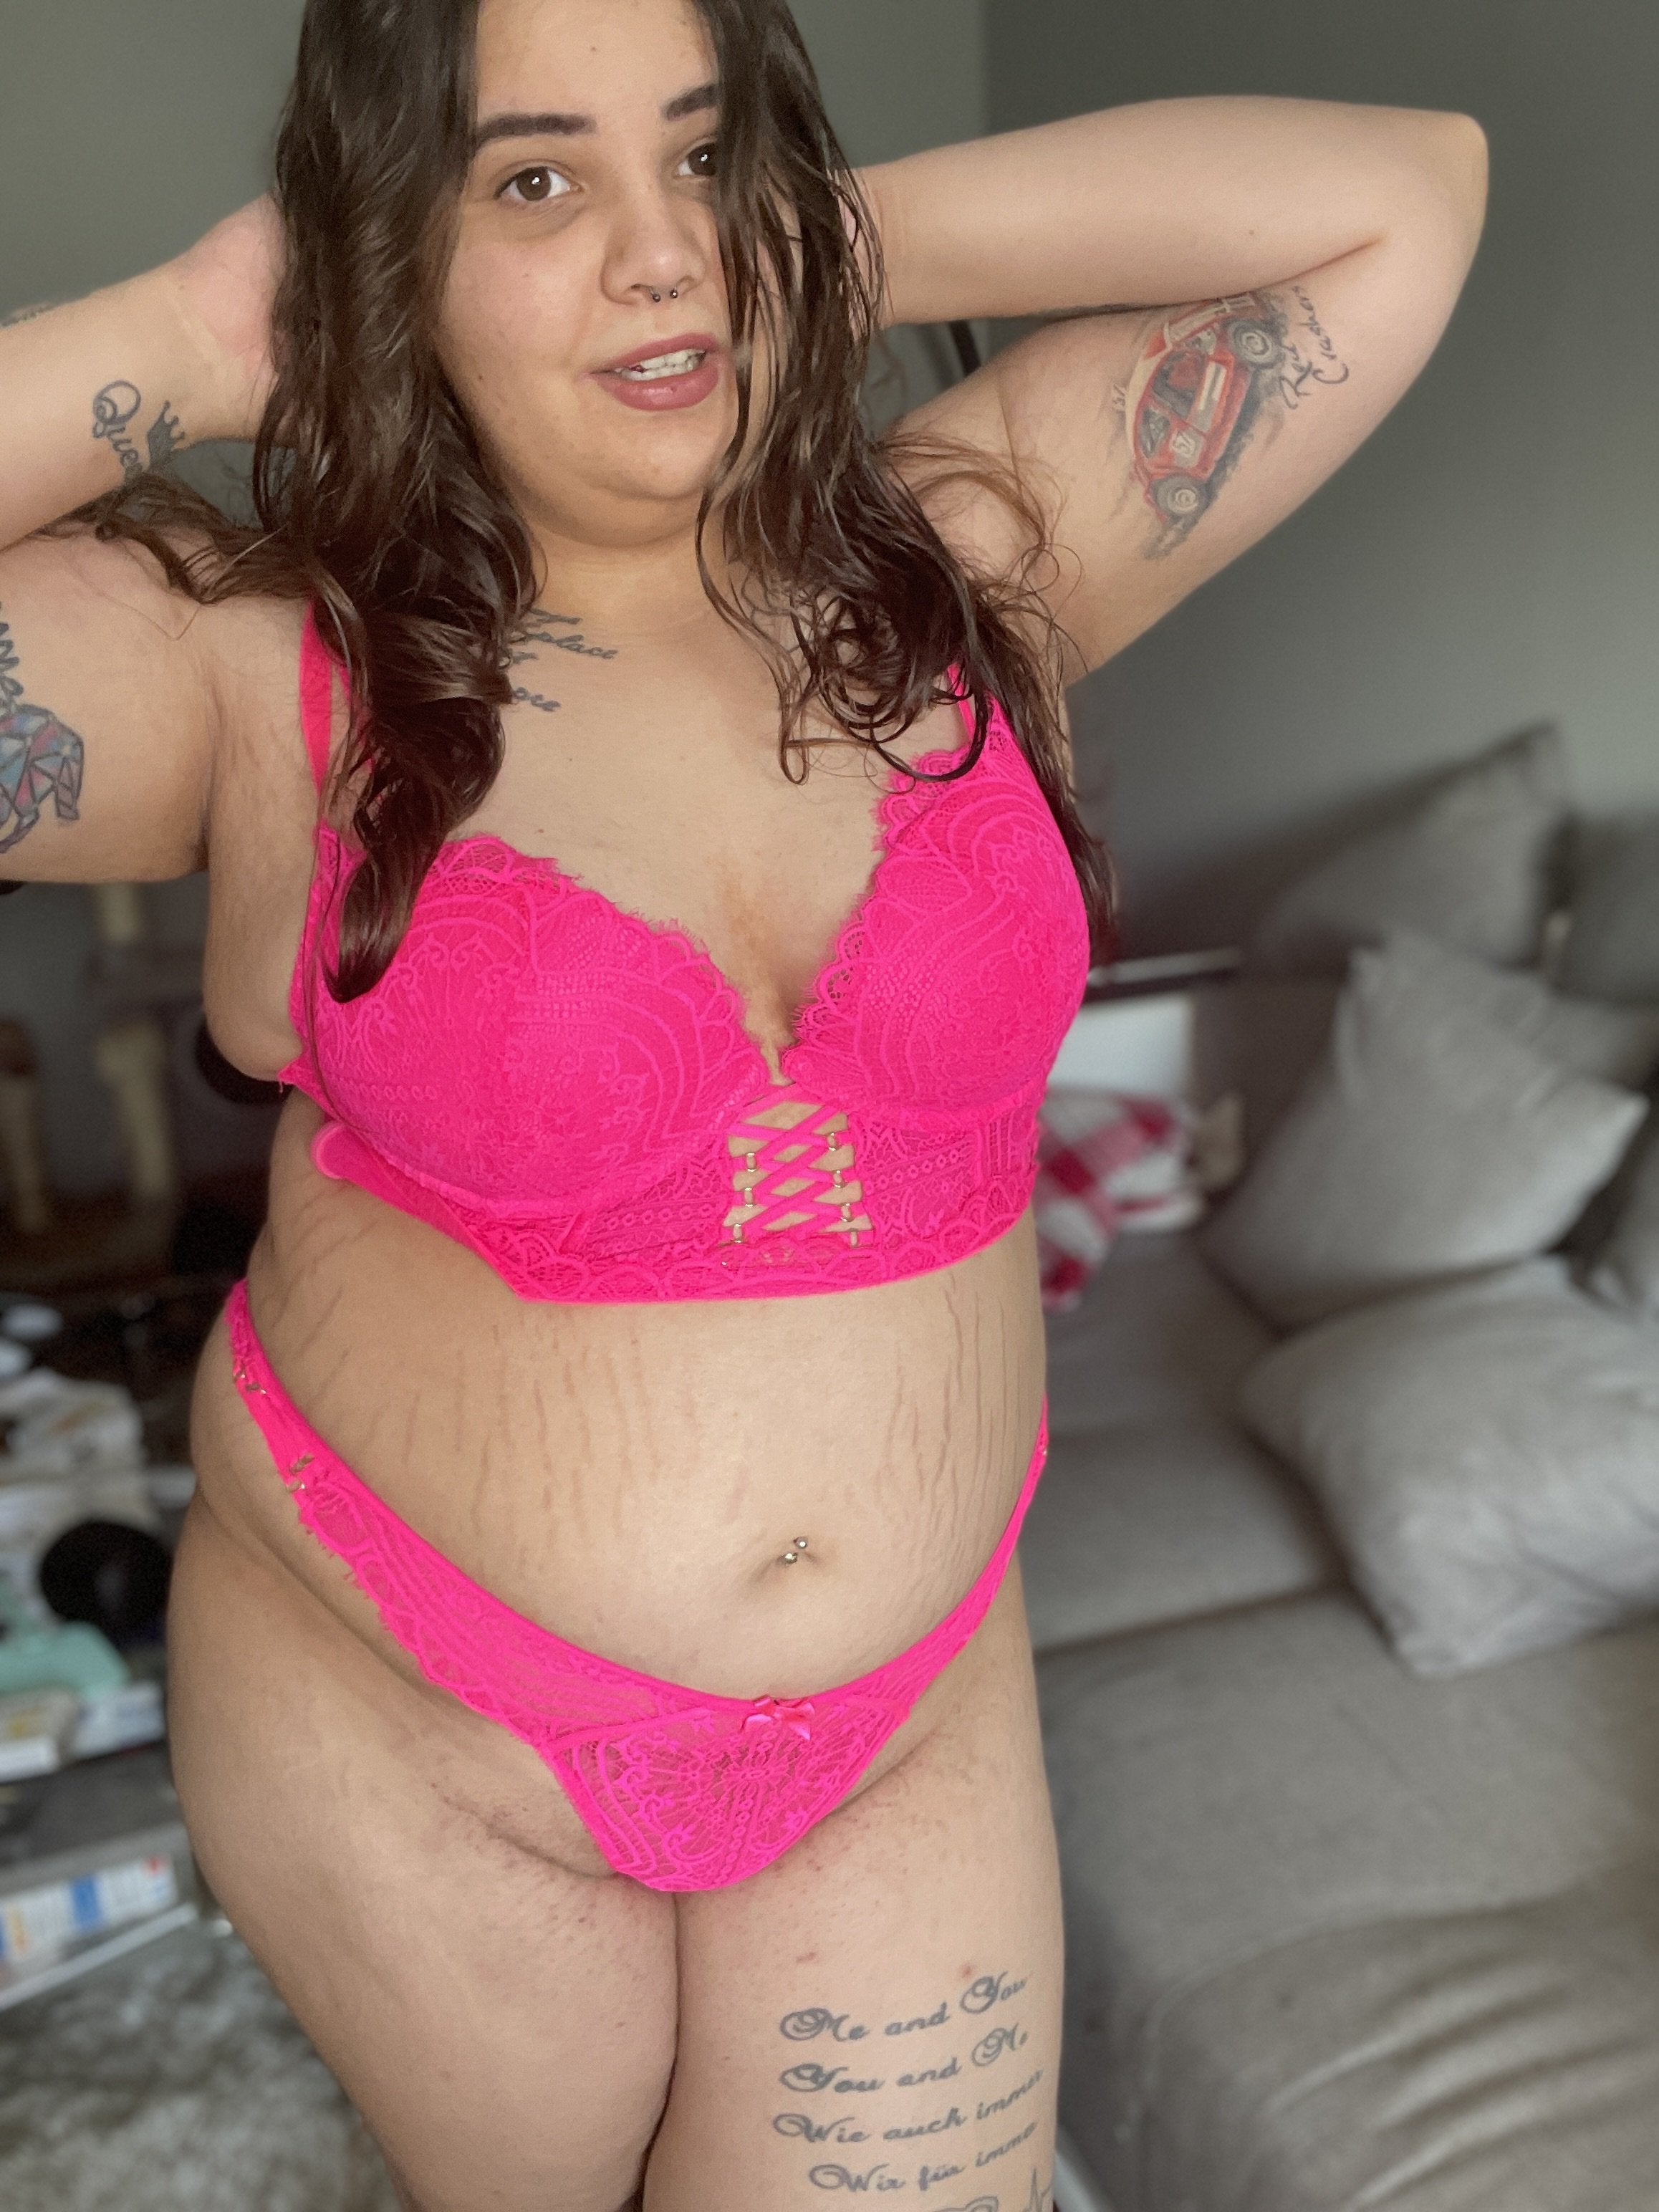 Am I qualified to be your fuckdoll Thick White